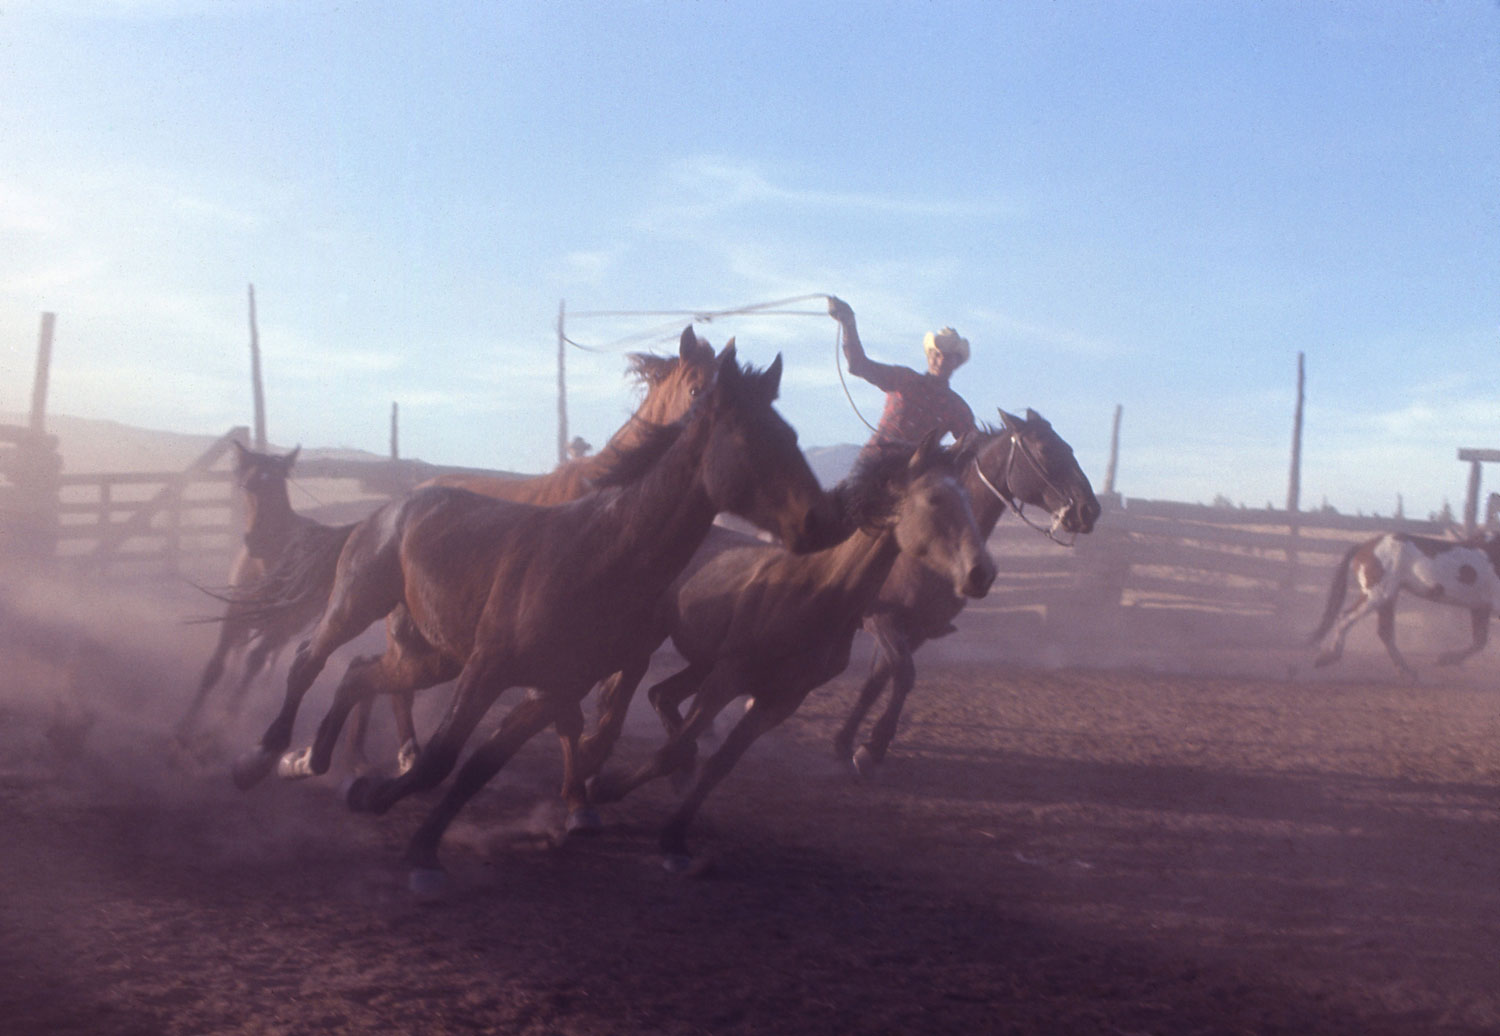 Mustangs on a ranch being lassoed for branding, 1968.